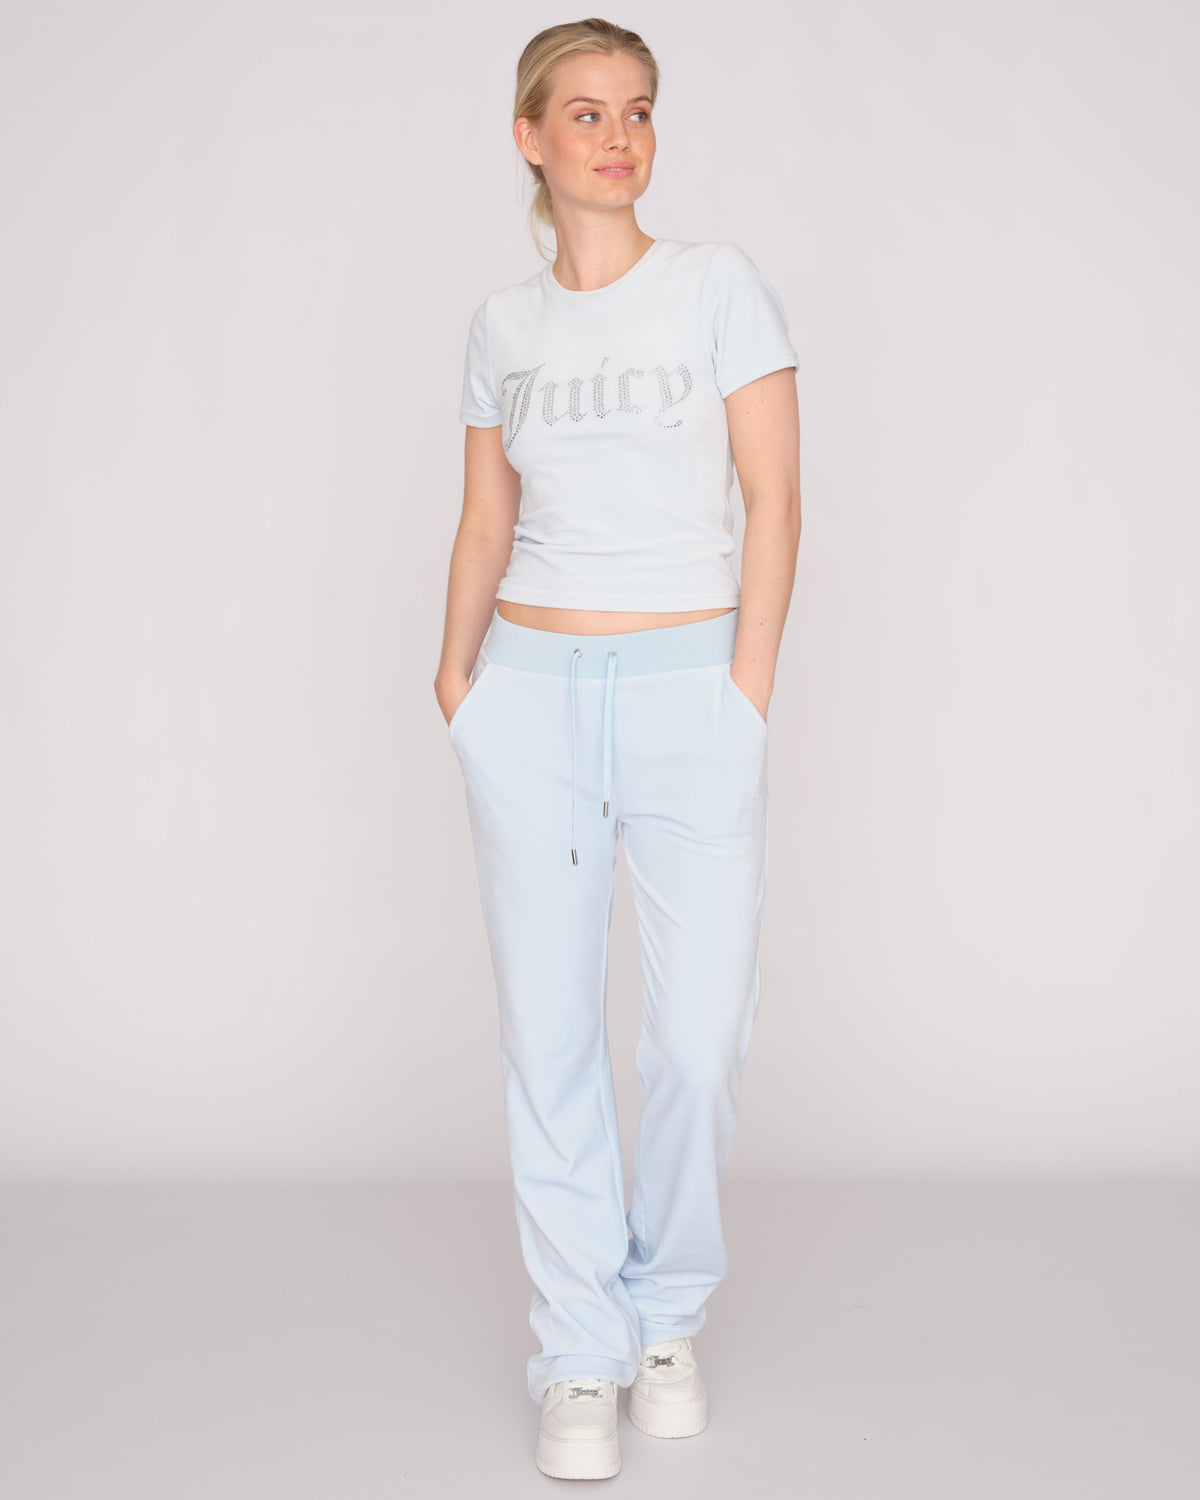 Taylor Diamante Fitted Velour Tee Nantucket Breeze - Juicy Couture Scandinavia